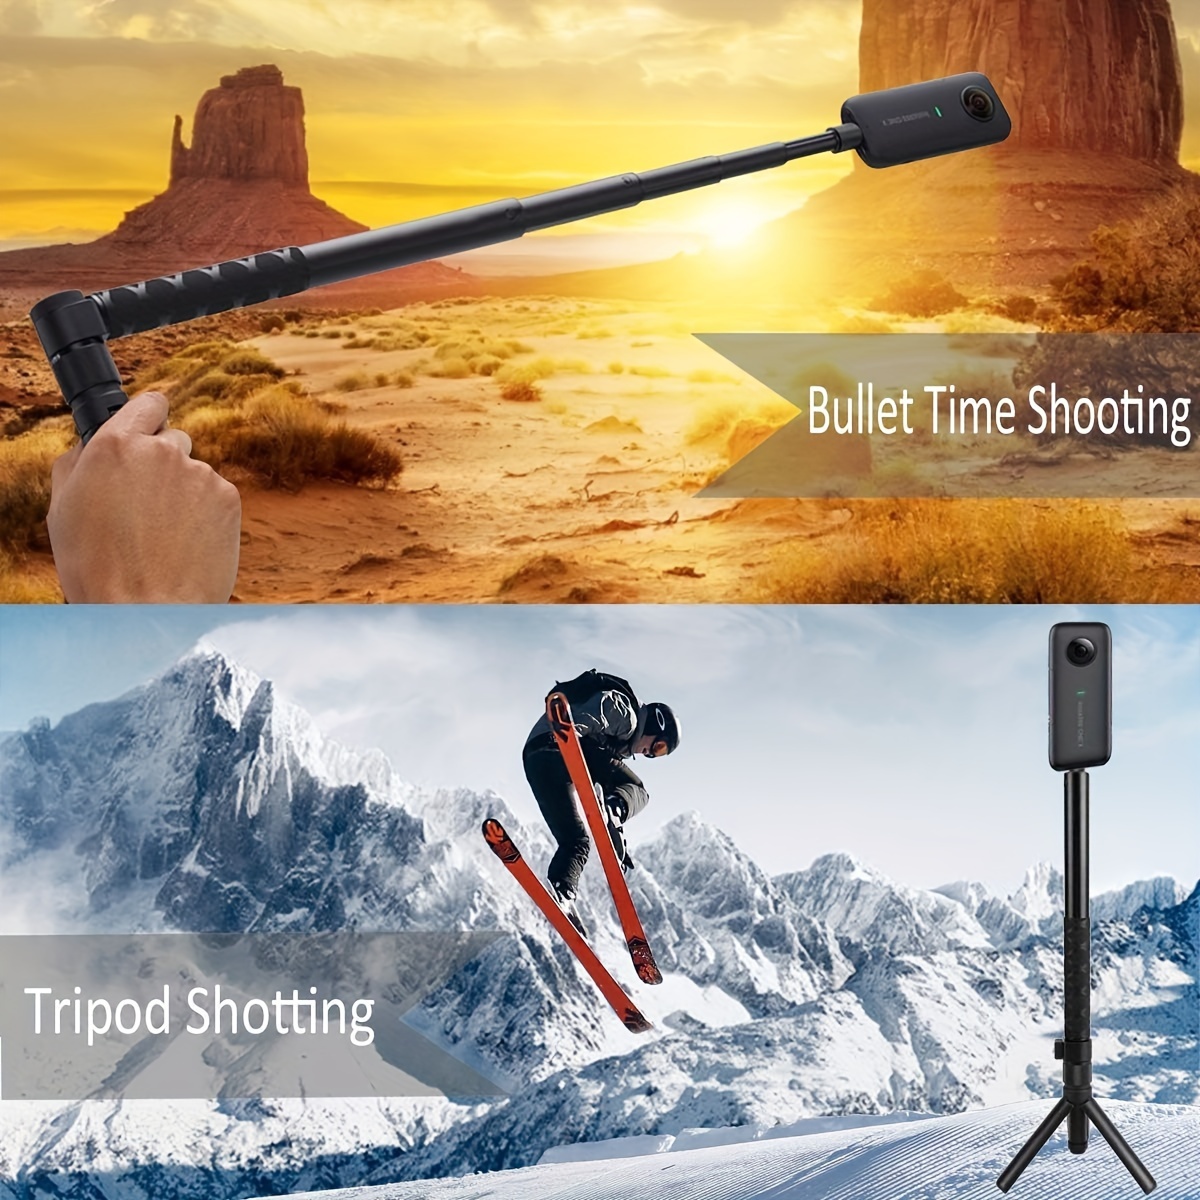 Invisible Selfie Stick 1/4 Inch Screw Compatible with Insta360 ONE X3 ONE  X2 ONE R, ONE, GO 2 and Many More